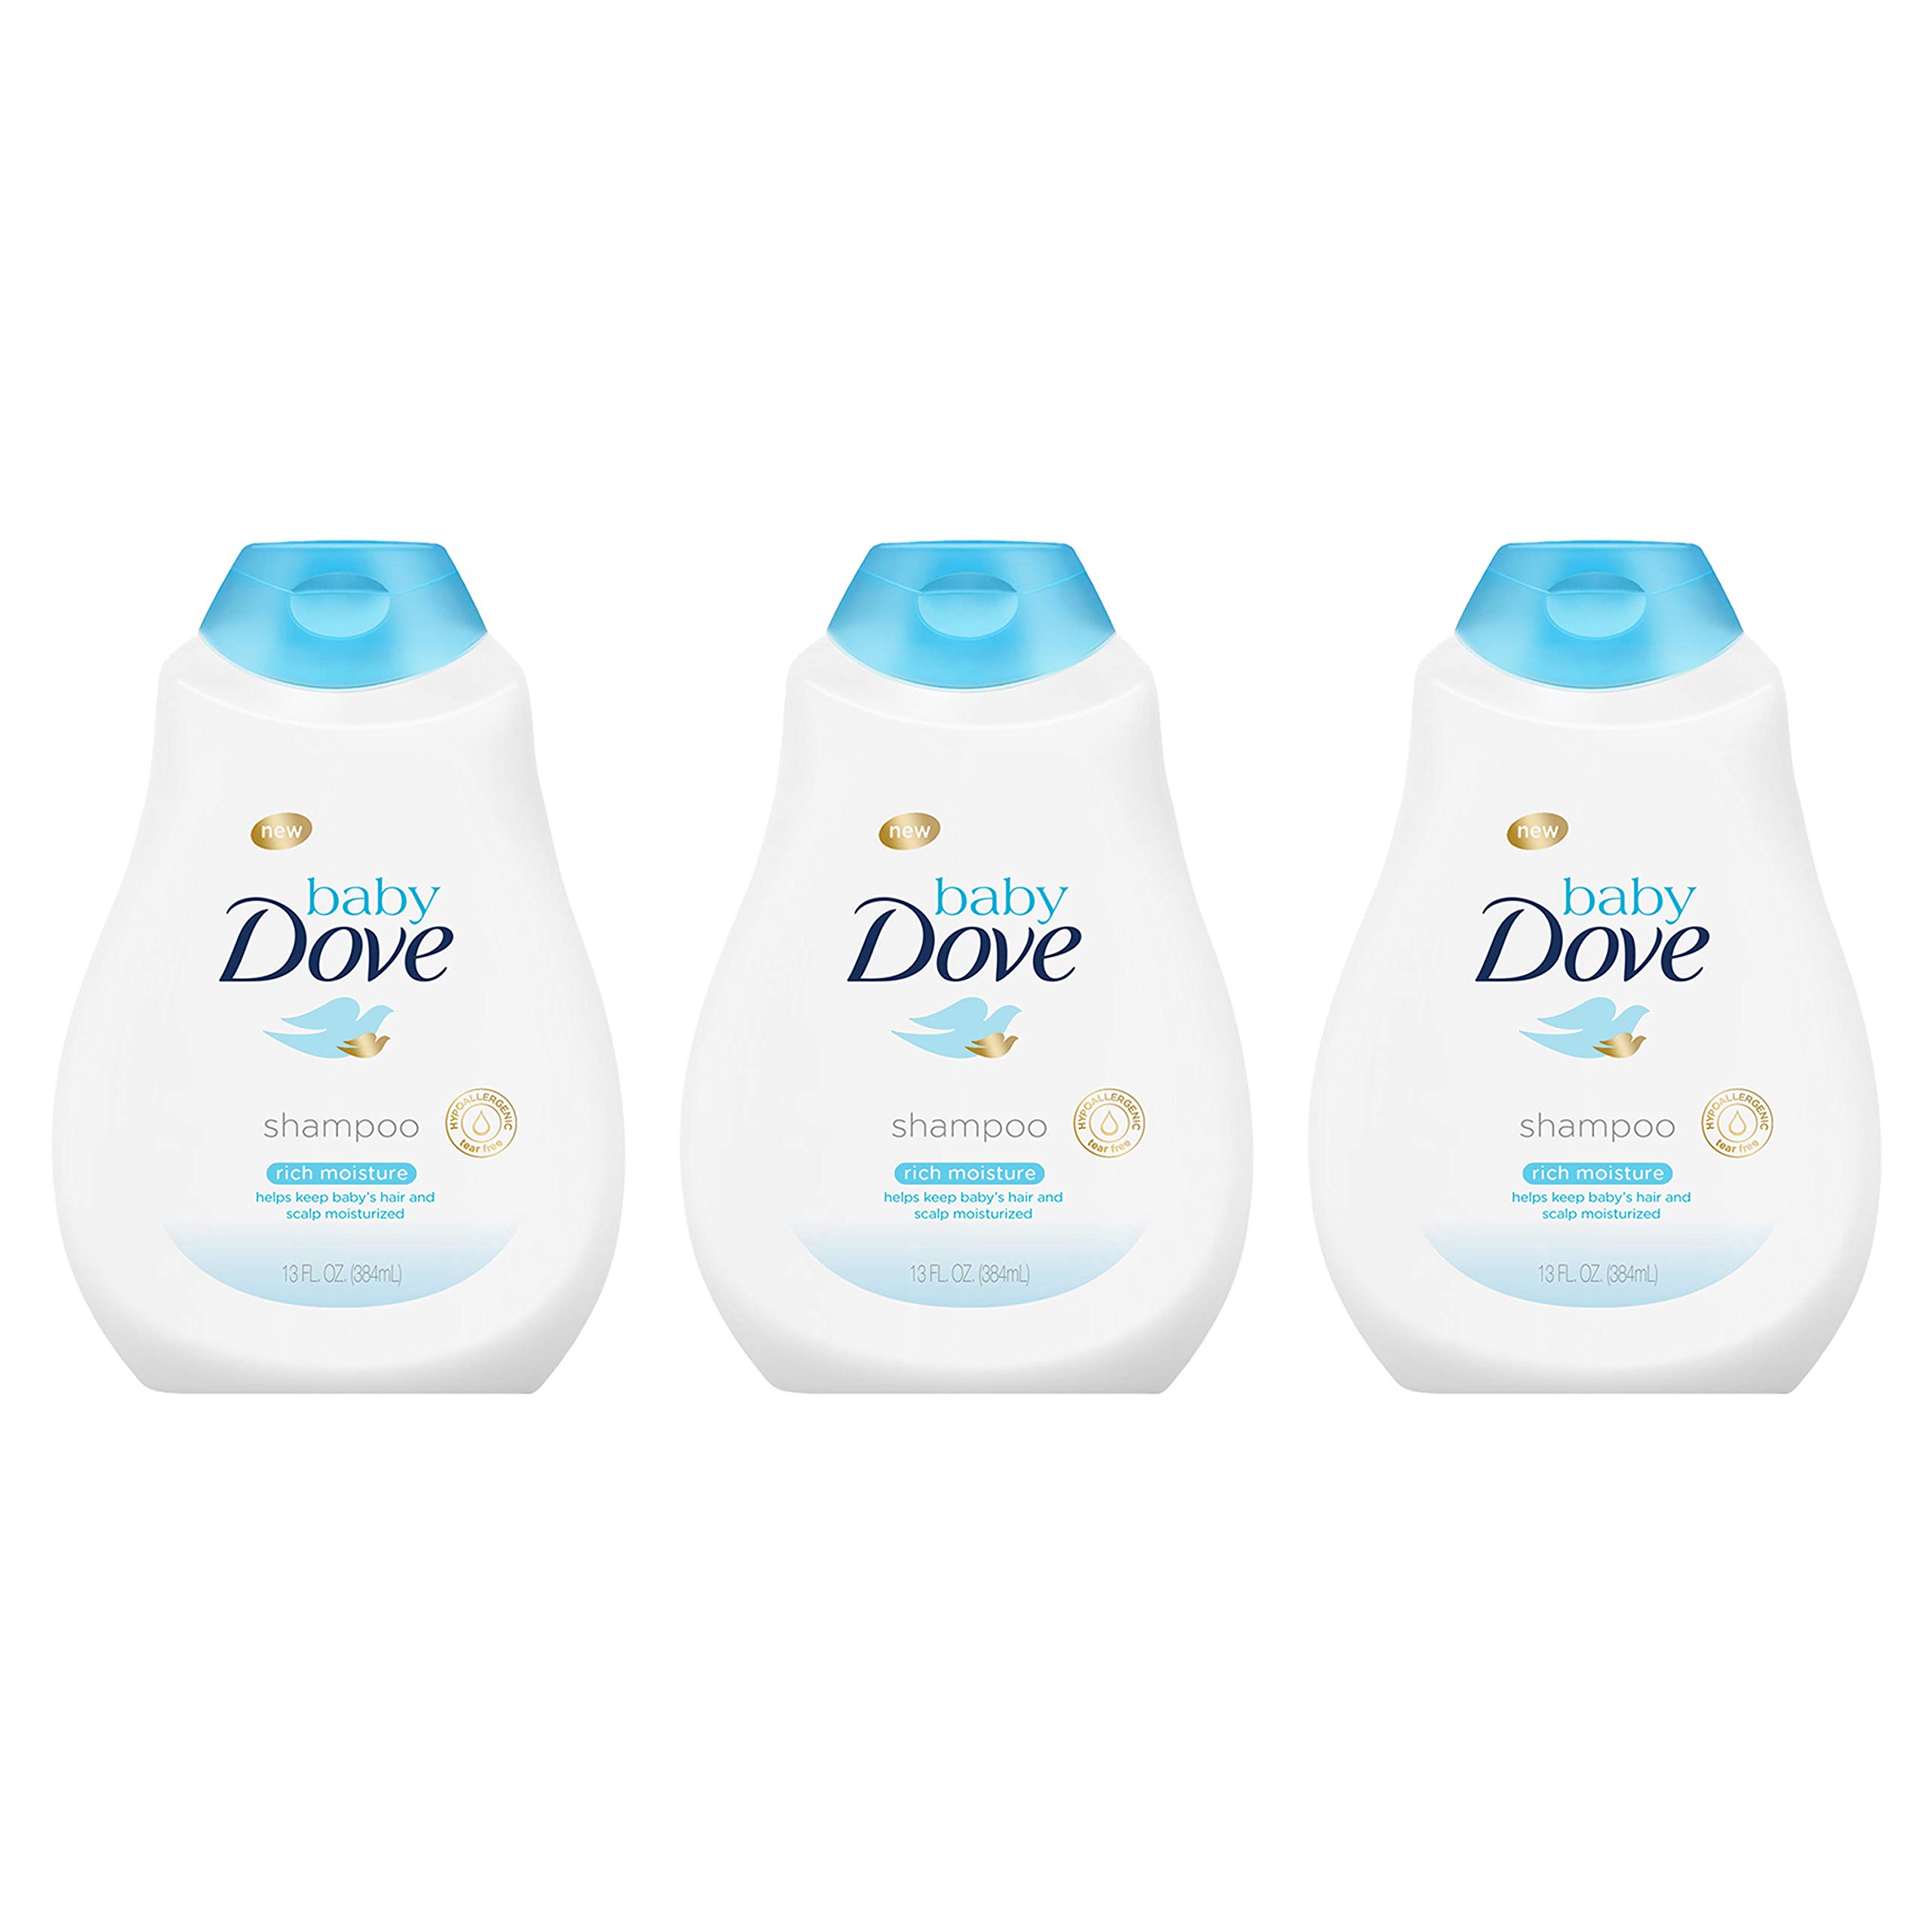 Baby Dove Tear Free Baby Shampoo Rich Moisture, 13 Ounce (Pack of 3)